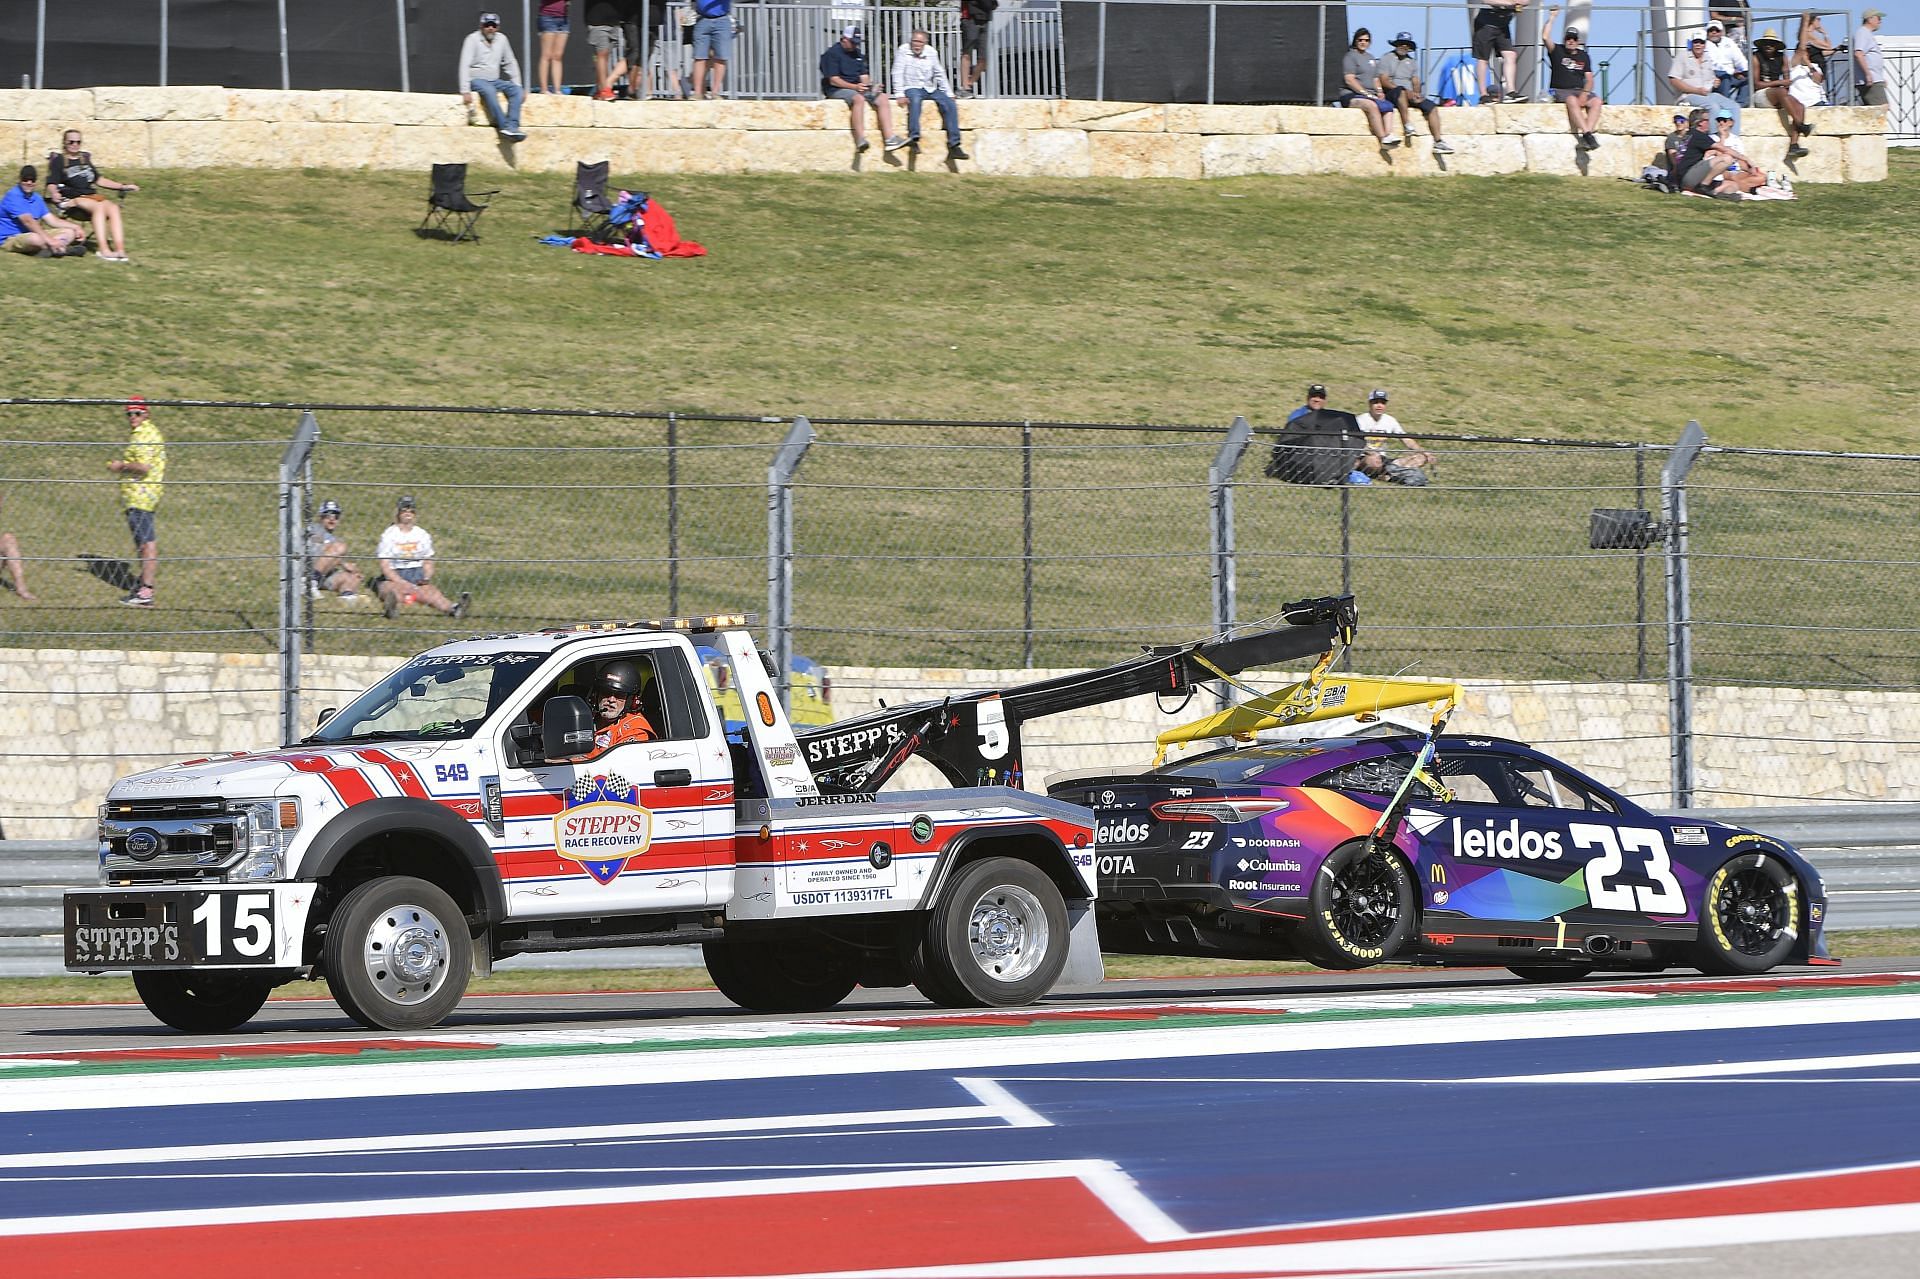 Bubba Wallace Jr.&#039;s Toyota Camry being towed during the 2022 NASCAR Cup Series Echopark Automotive Texas Grand Prix at Circuit of the Americas in Austin (Photo by Logan Riely/Getty Images)